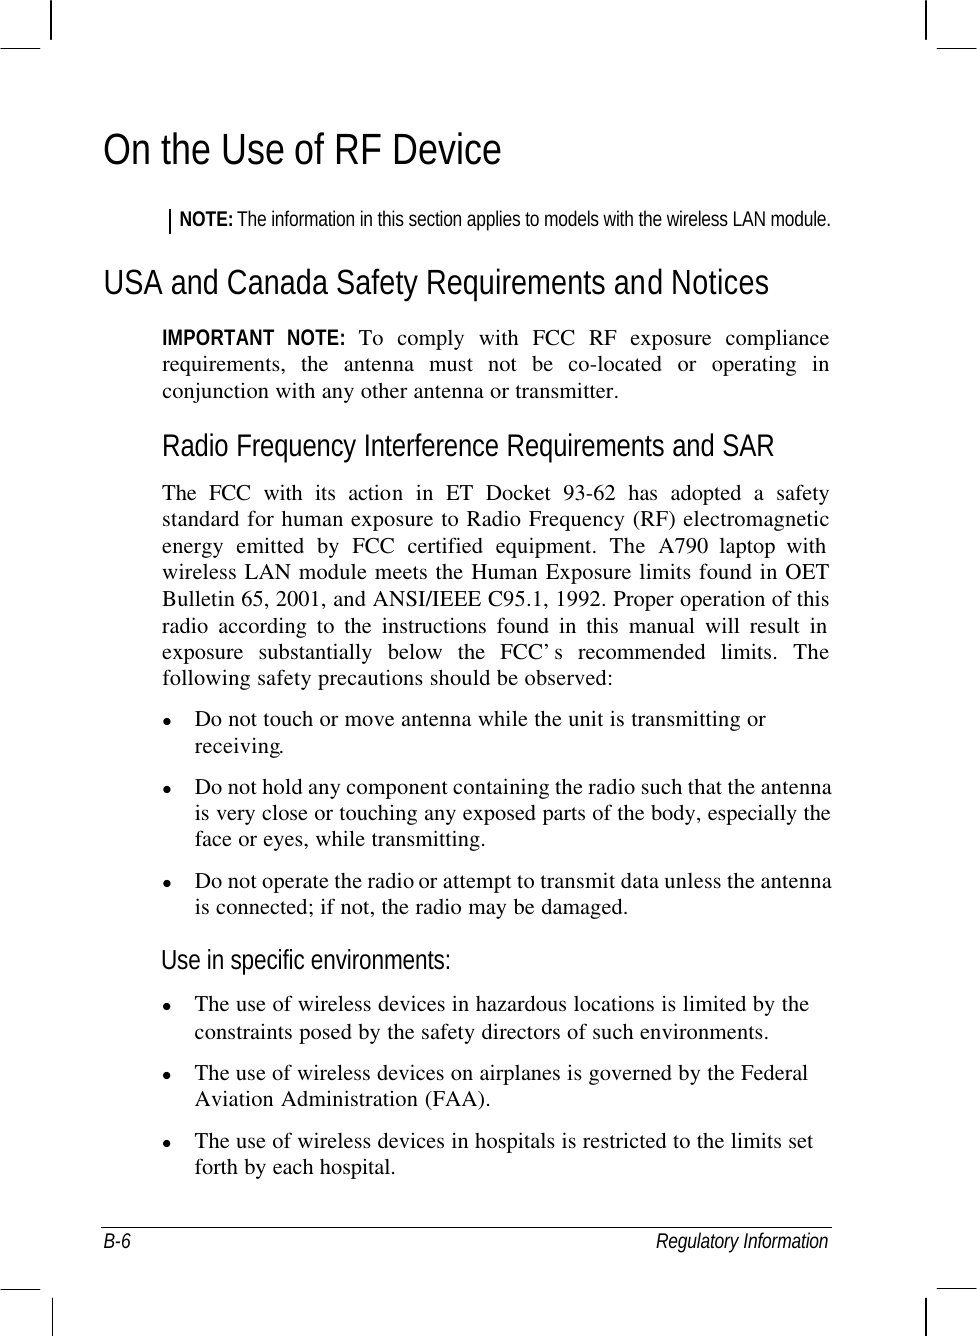  B-6 Regulatory Information On the Use of RF Device NOTE: The information in this section applies to models with the wireless LAN module. USA and Canada Safety Requirements and Notices IMPORTANT NOTE: To comply with FCC RF exposure compliance requirements, the antenna must not be co-located or operating in conjunction with any other antenna or transmitter. Radio Frequency Interference Requirements and SAR The FCC with its action in ET Docket 93-62 has adopted a safety standard for human exposure to Radio Frequency (RF) electromagnetic energy emitted by FCC certified equipment. The  A790 laptop with wireless LAN module meets the Human Exposure limits found in OET Bulletin 65, 2001, and ANSI/IEEE C95.1, 1992. Proper operation of this radio according to the instructions found in this manual will result in exposure substantially below the FCC’s recommended limits. The following safety precautions should be observed: l Do not touch or move antenna while the unit is transmitting or receiving. l Do not hold any component containing the radio such that the antenna is very close or touching any exposed parts of the body, especially the face or eyes, while transmitting. l Do not operate the radio or attempt to transmit data unless the antenna is connected; if not, the radio may be damaged. Use in specific environments: l The use of wireless devices in hazardous locations is limited by the constraints posed by the safety directors of such environments. l The use of wireless devices on airplanes is governed by the Federal Aviation Administration (FAA). l The use of wireless devices in hospitals is restricted to the limits set forth by each hospital. 